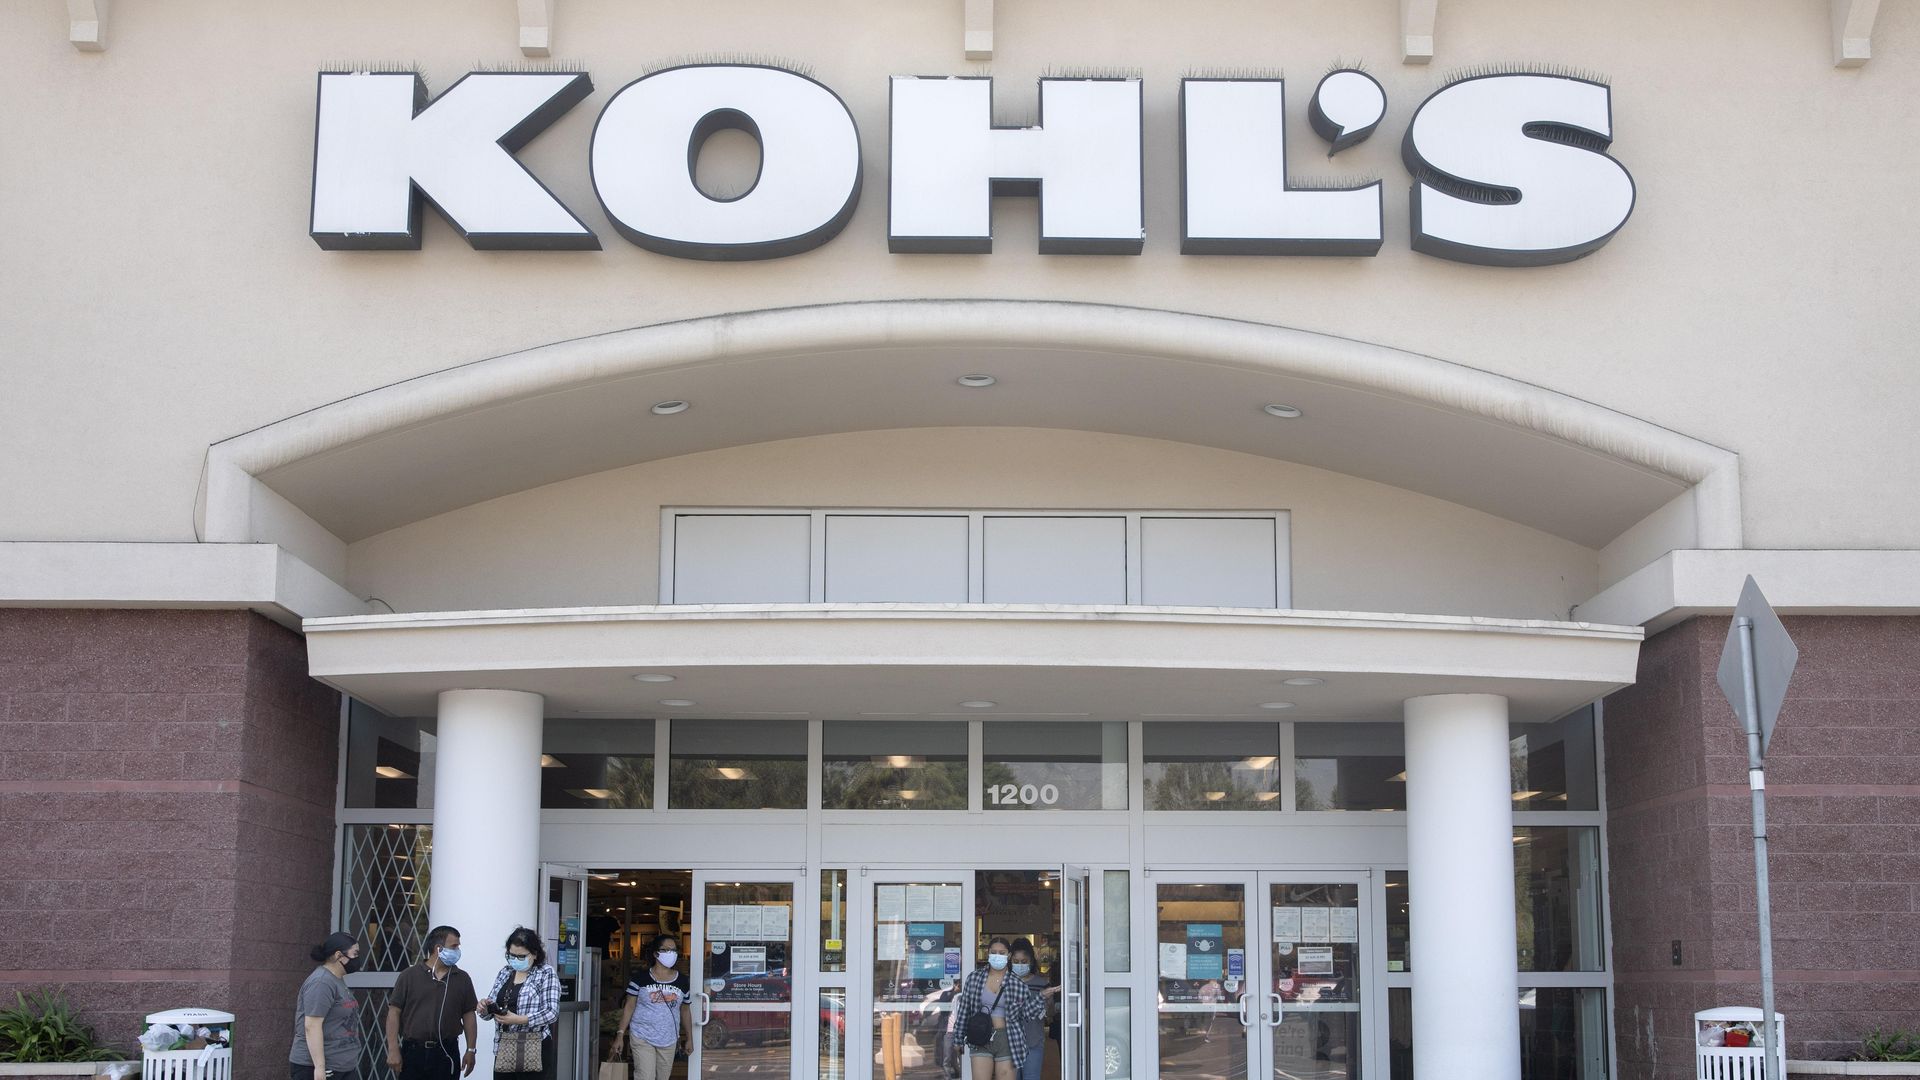 People shop at Kohl's amid the pandemic. Photo by Liu Guanguan/China News Service via Getty Images